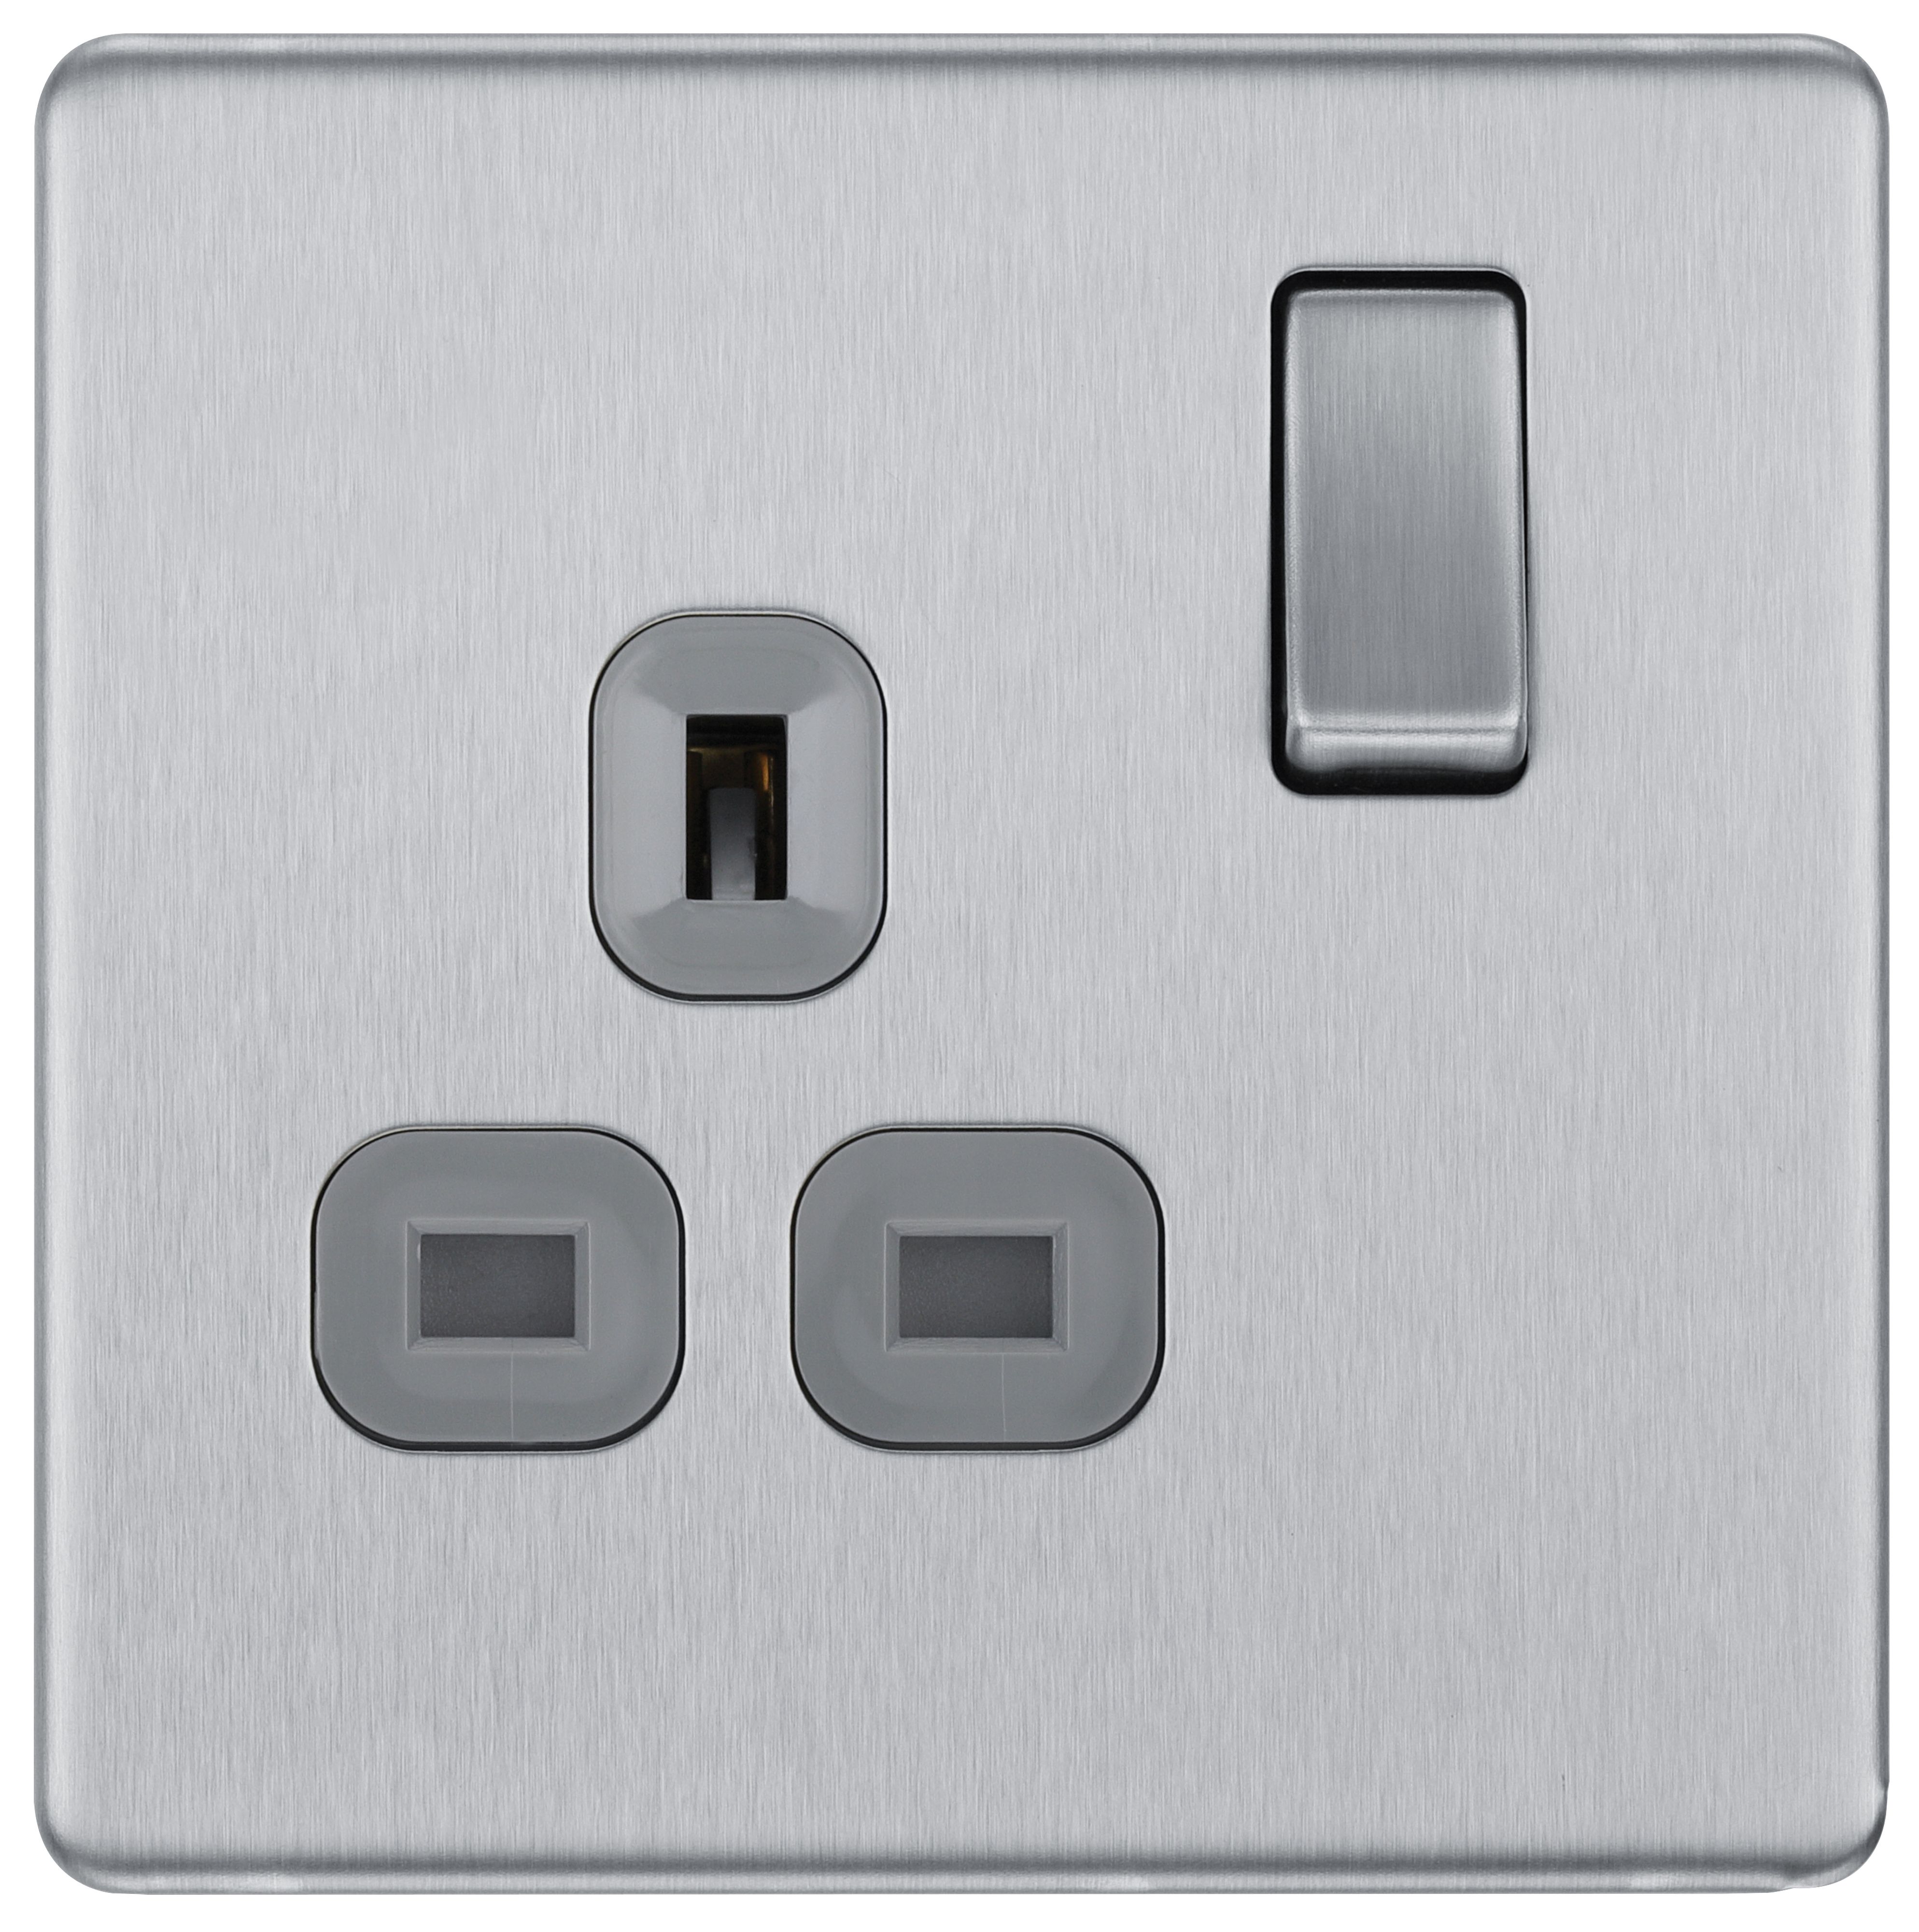 Image of BG Screwless Flatplate Brushed Steel Single Switched 13A Power Socket Double Pole